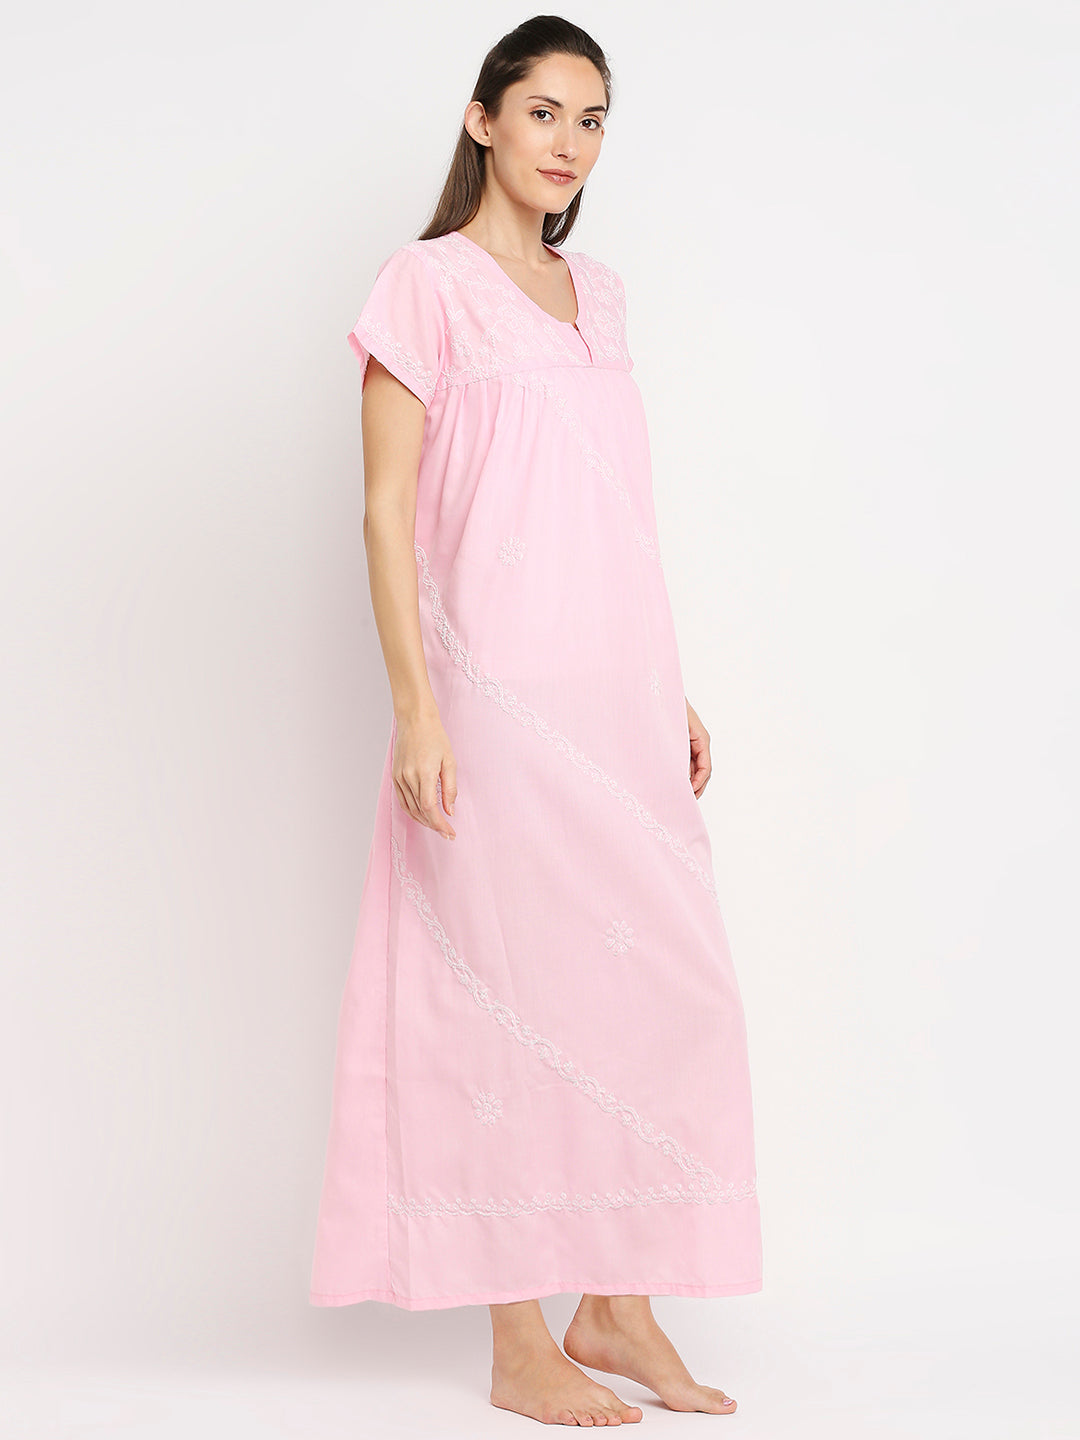 Buy Women Cotton Nighty/Women Cotton Night Gown/Cotton Nightdress Online In  India At Discounted Prices